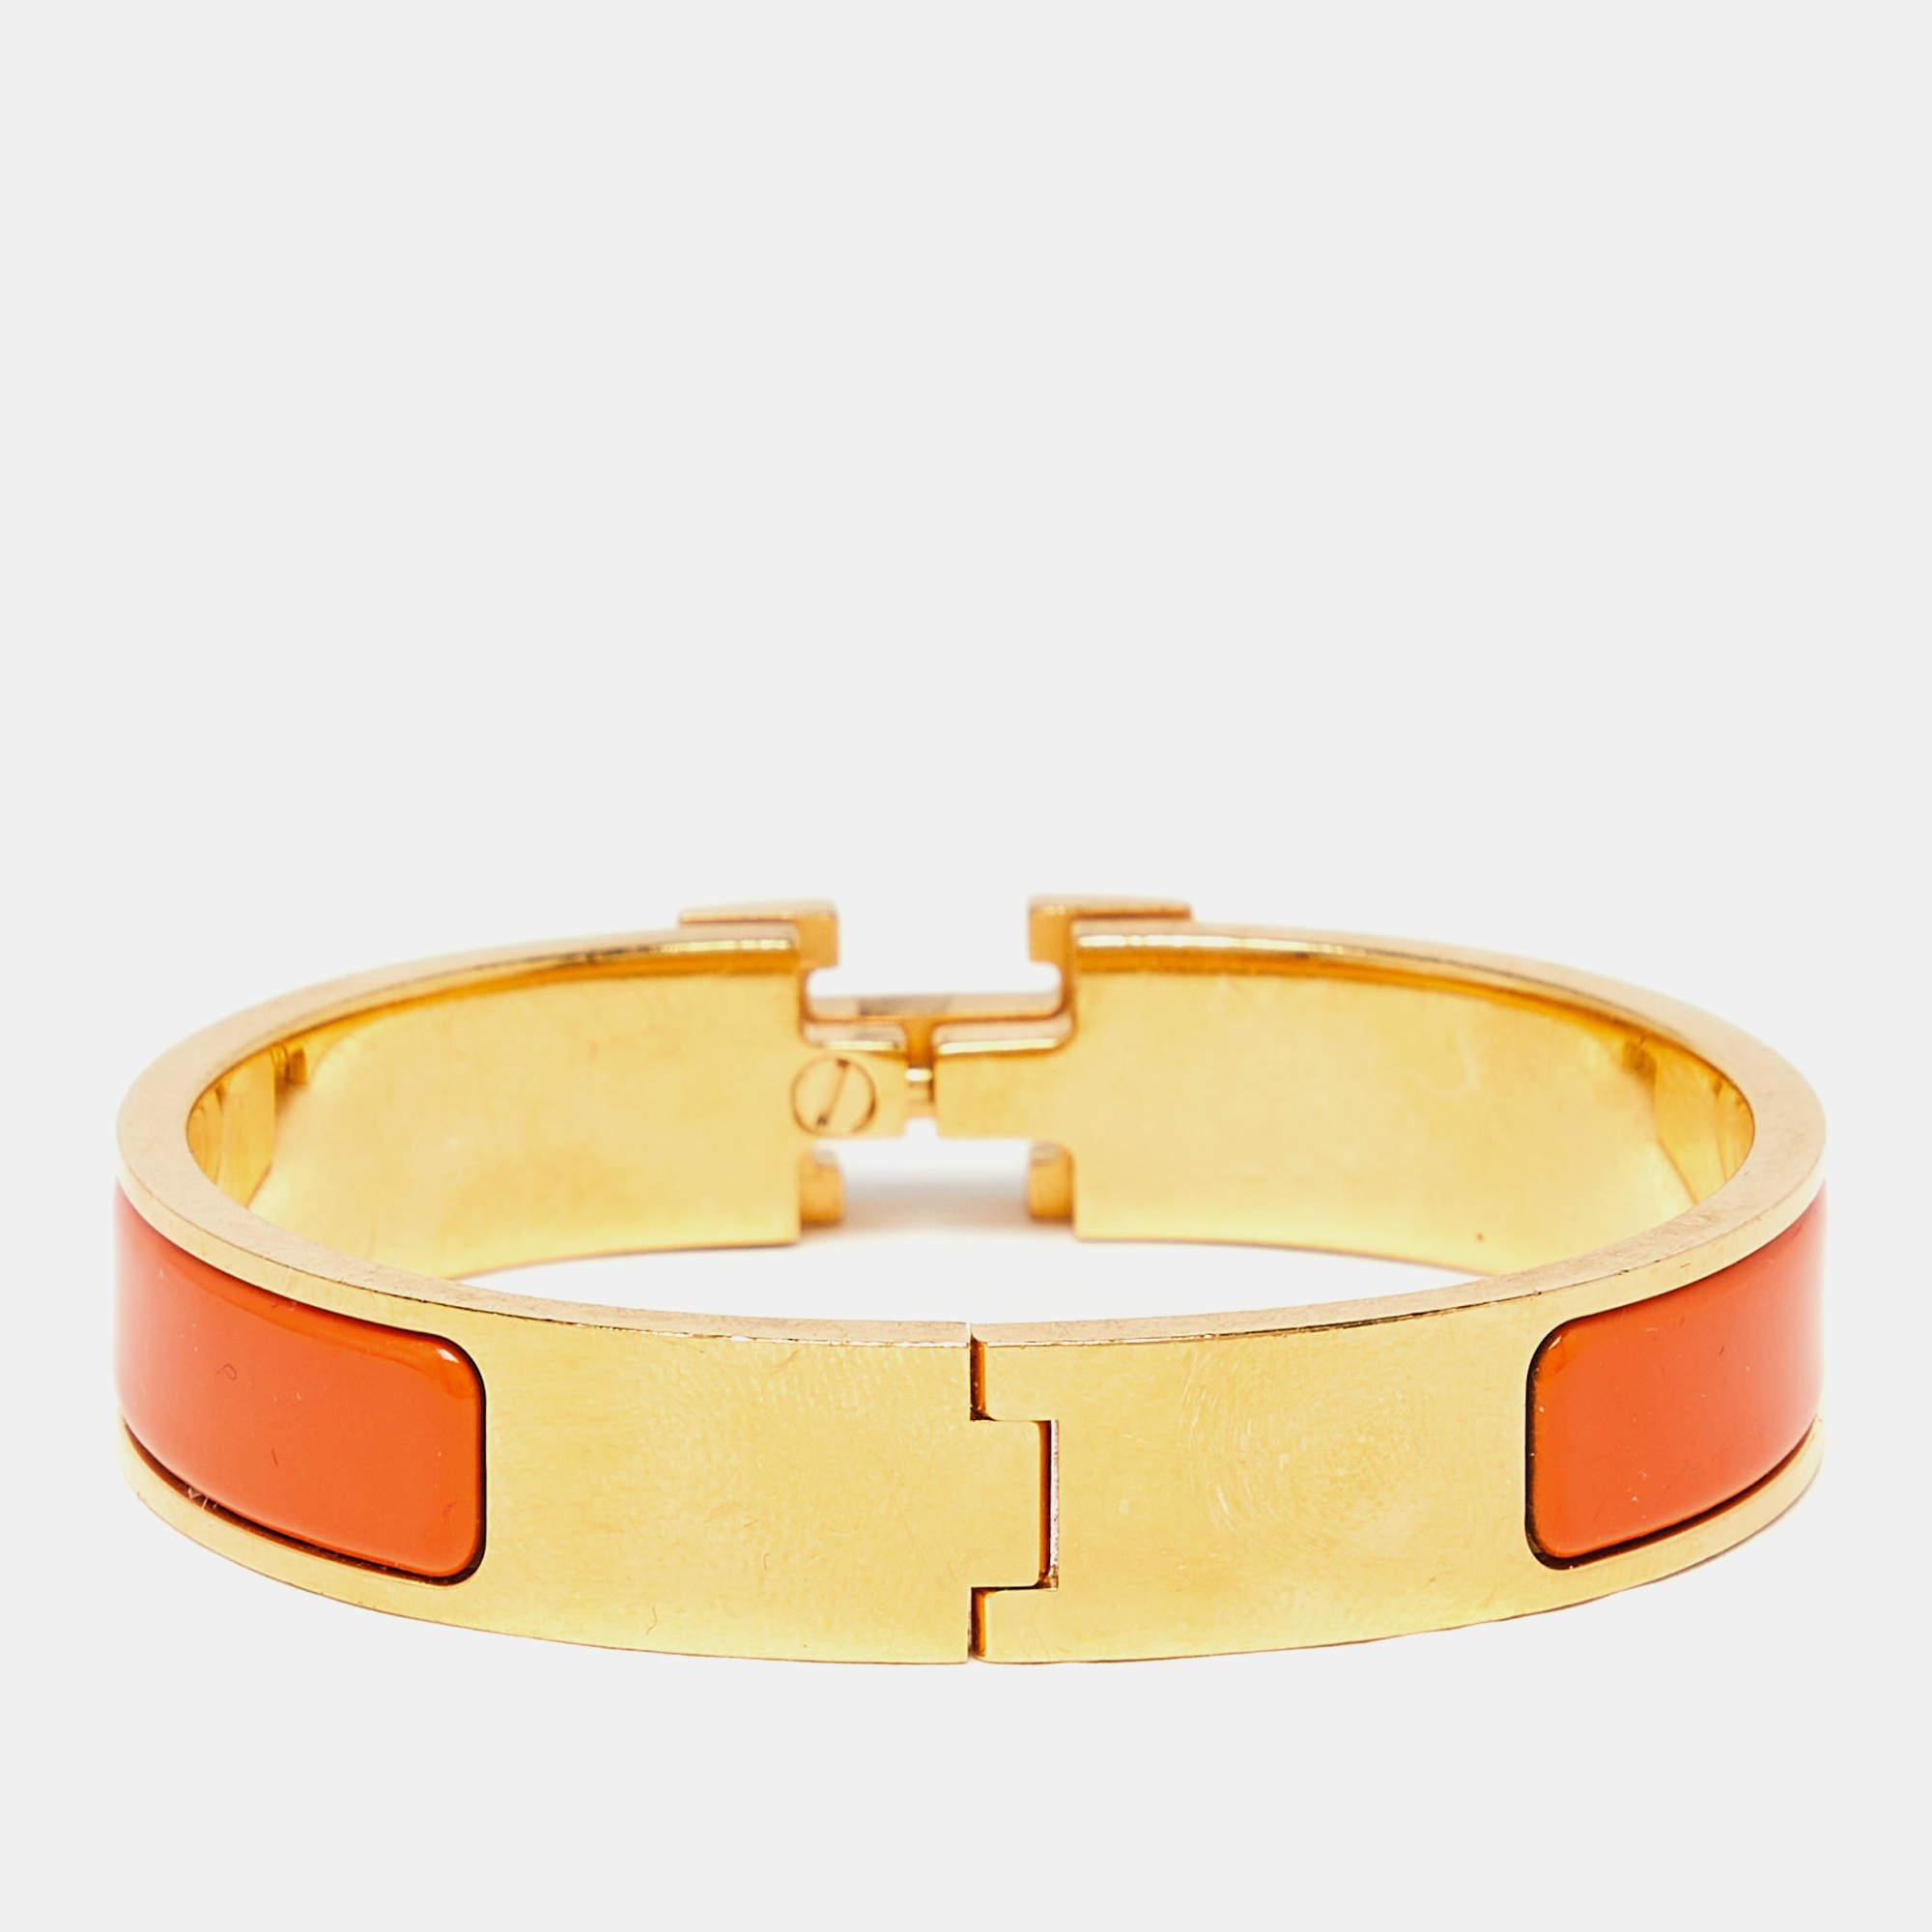 The Hermès Clic Clac H bracelet is an exquisite piece of jewelry. It features a glossy white enamel band with a prominent gold-plated H-shaped clasp, creating a striking contrast. This luxurious and elegant accessory embodies timeless style and